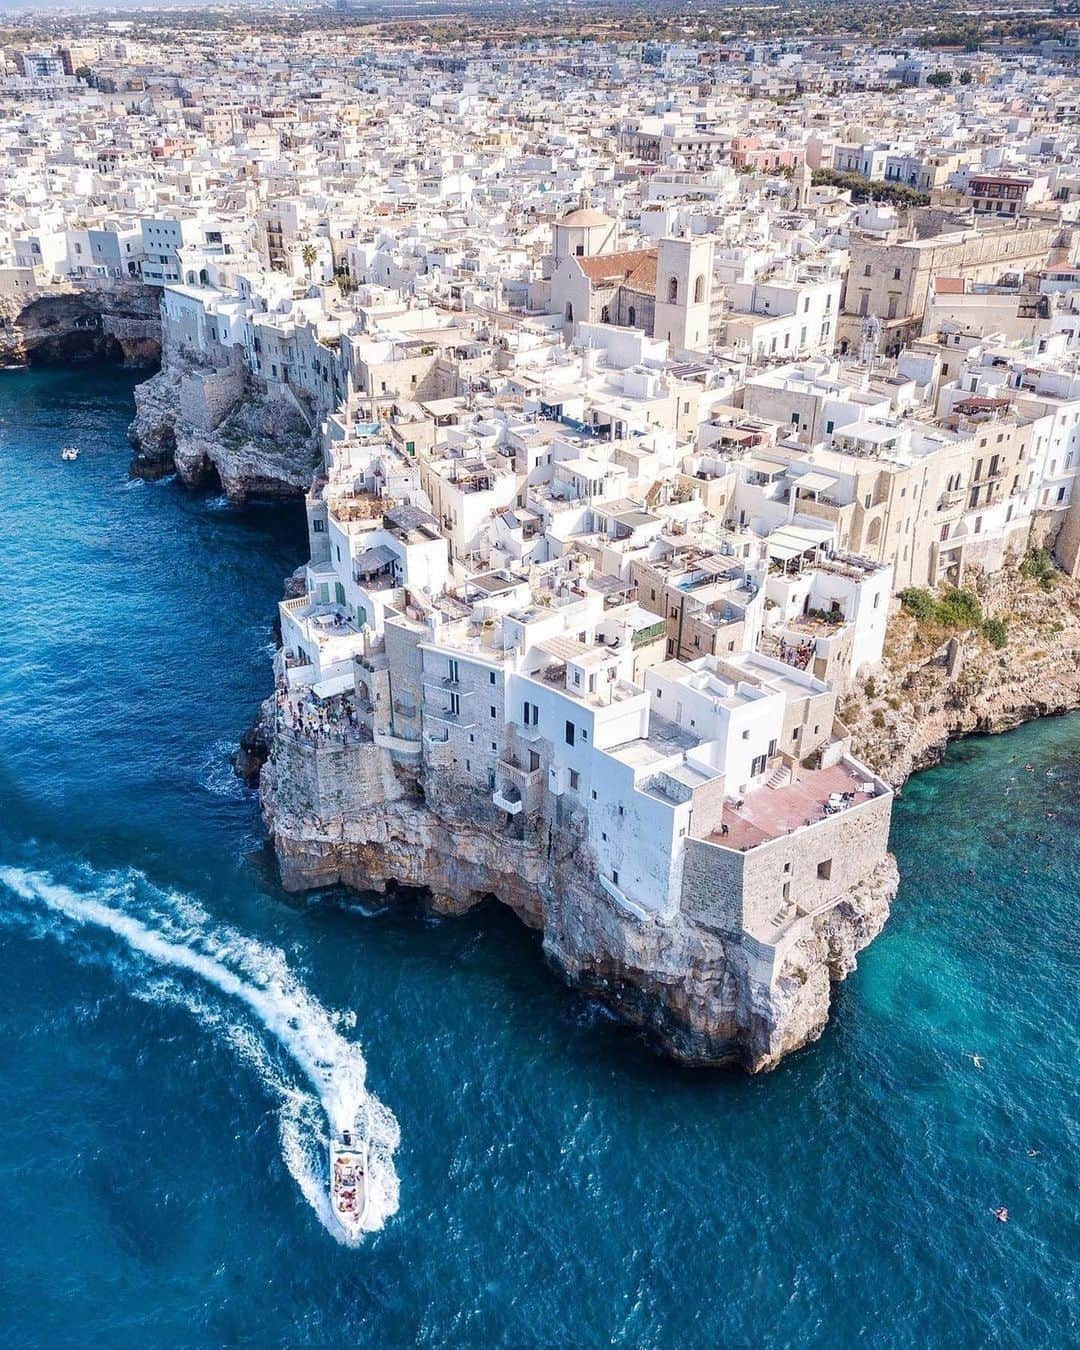 Architecture - Housesのインスタグラム：「Puglia🇮🇹 an Italian region bathed by two seas, some of which are Unesco World Heritage Sites. A paradisiacal place worth visiting. What do you think?👇  1. @pinkines  2. @pinkines  3. @world_walkerz  4. @pinkines  5. @pinkines  6. @pinkines  7. @pinkines  8. @pinkines  9. @pinkines  10. @michelangelodevincentis   _____ #architecturehunter #architectureanddesign #amazingarchitecture #arqlovers #interiordesignphotography #arquitecturamoderna #architecturedesign #architecturedaily #architecturephoto #lookingup_architecture #architecturephotography #architecture #architect #engineering」